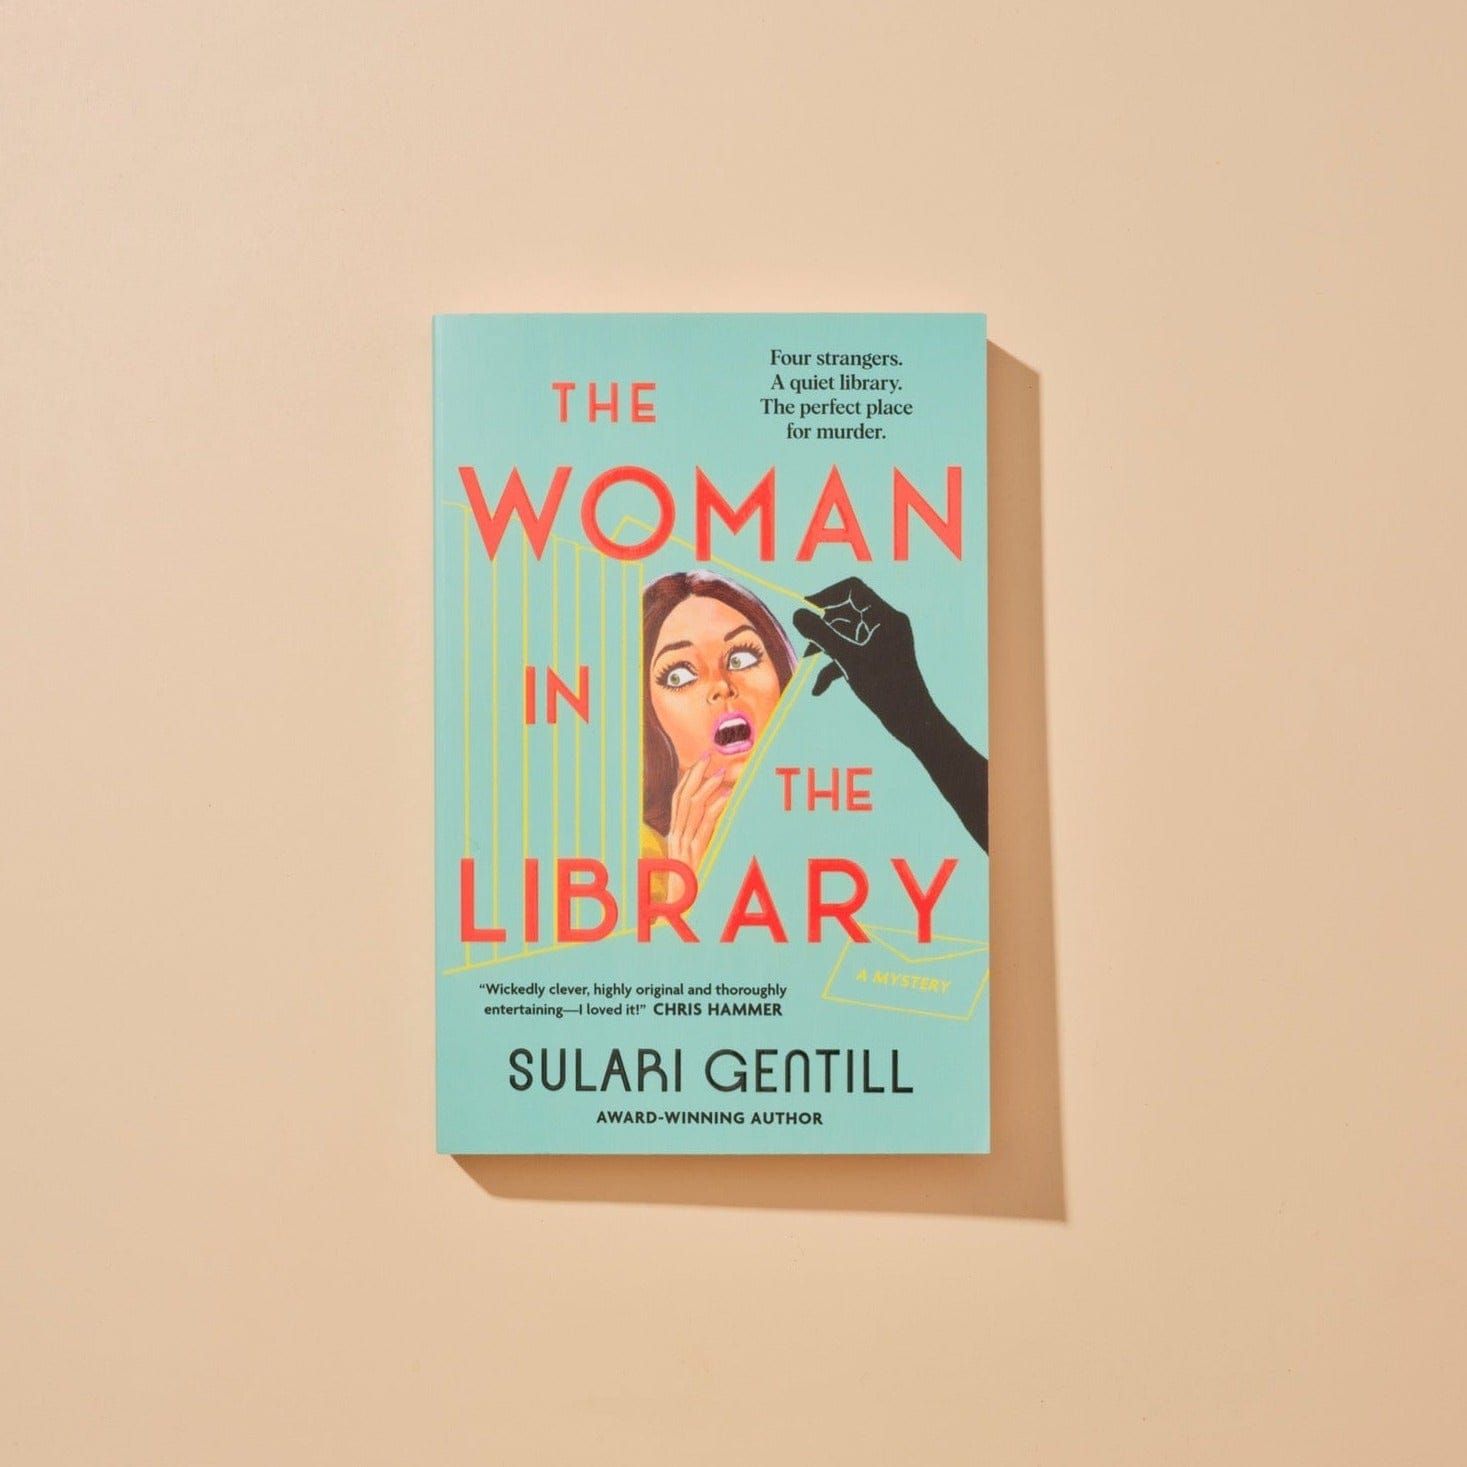 This image features the cover of 'The Woman in the Library' written by Sulari Gentill. This book is apart of our gifting bundle 'The Book Worm'